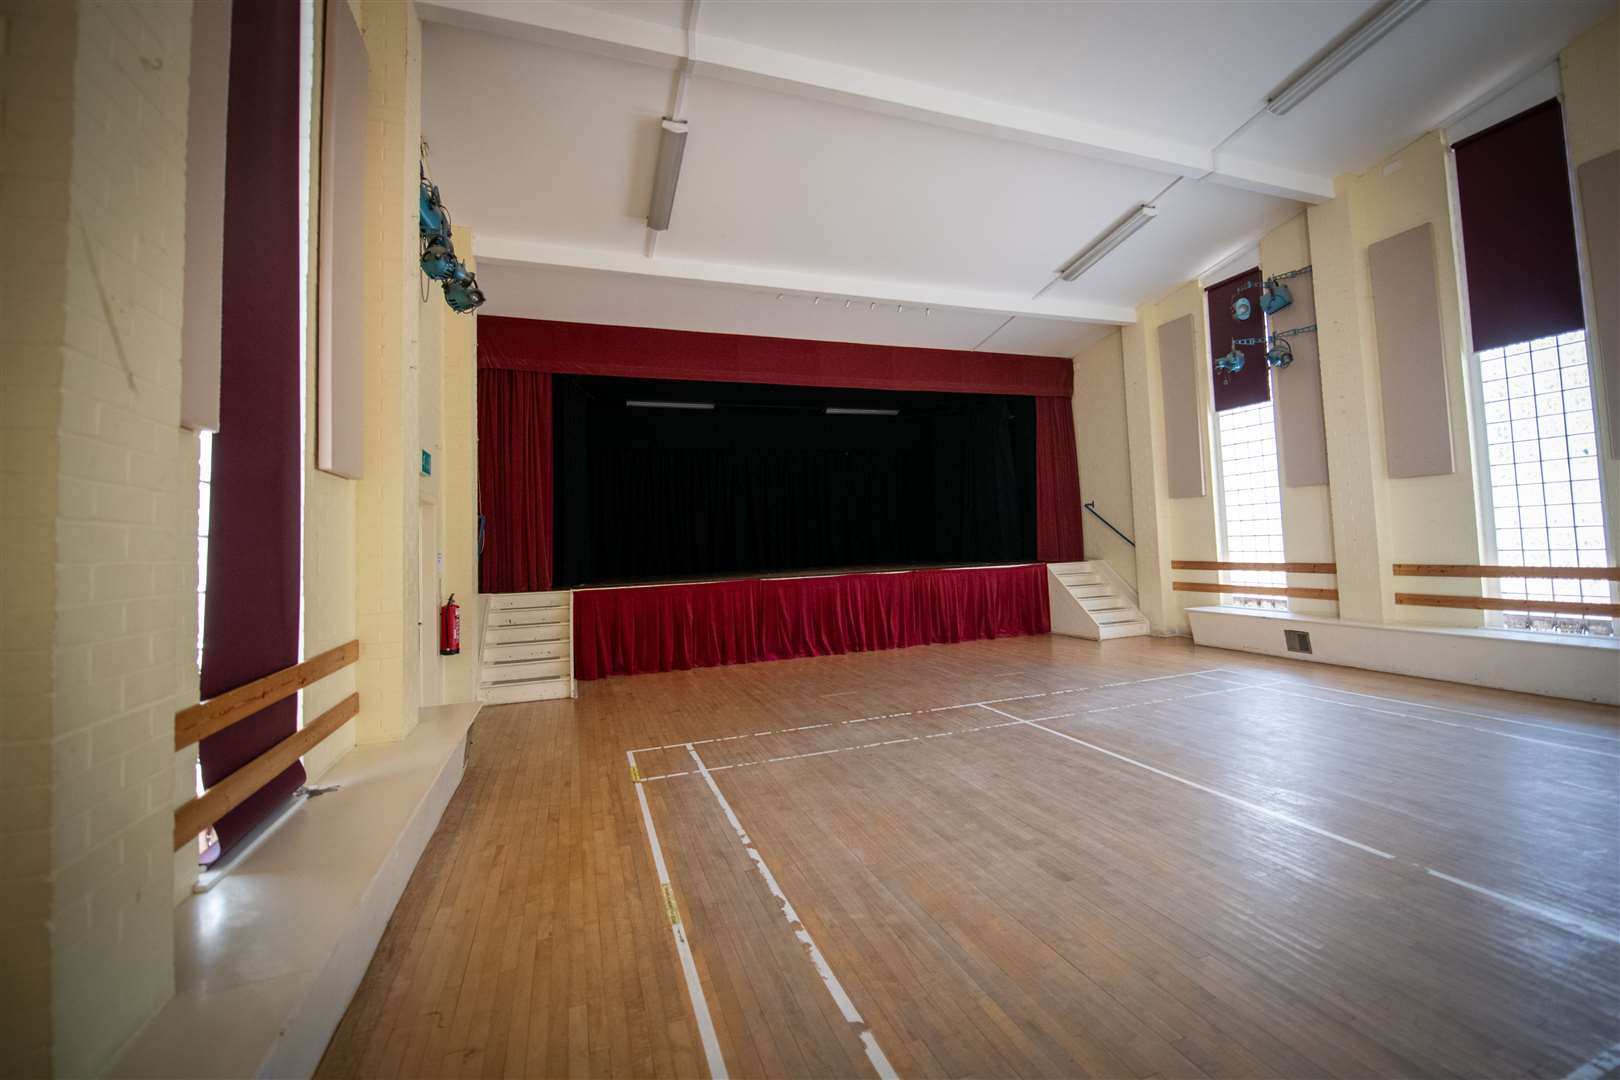 The North Kessock Village Hall has a deep stage with full curtains and there is room for a capacity audience of 200 seated. Picture: Callum Mackay